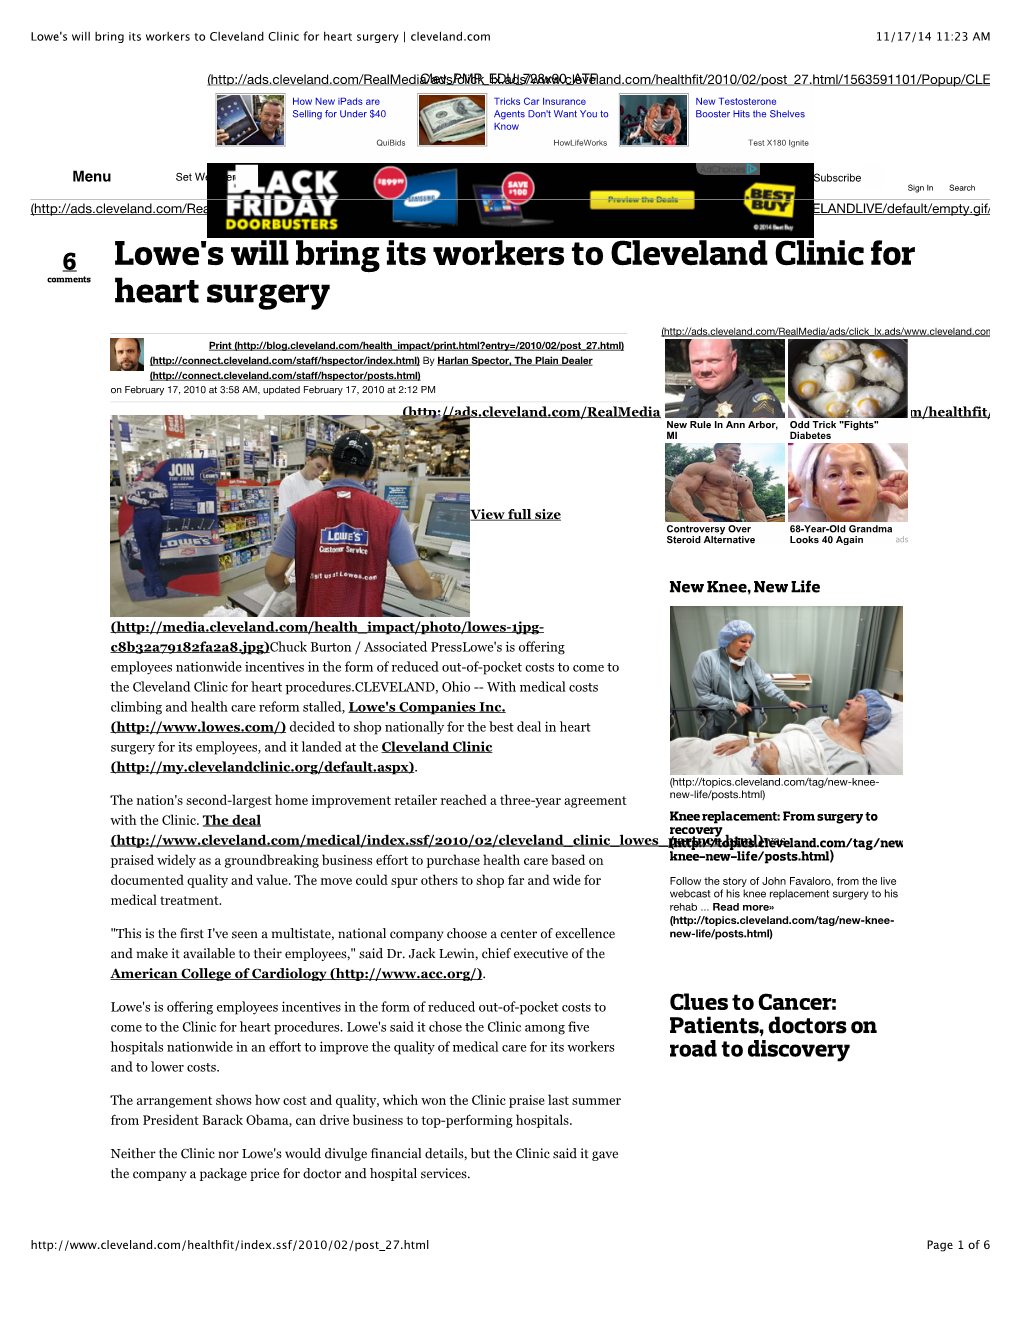 Lowe's Will Bring Its Workers to Cleveland Clinic for Heart Surgery | Cleveland.Com 11/17/14 11:23 AM